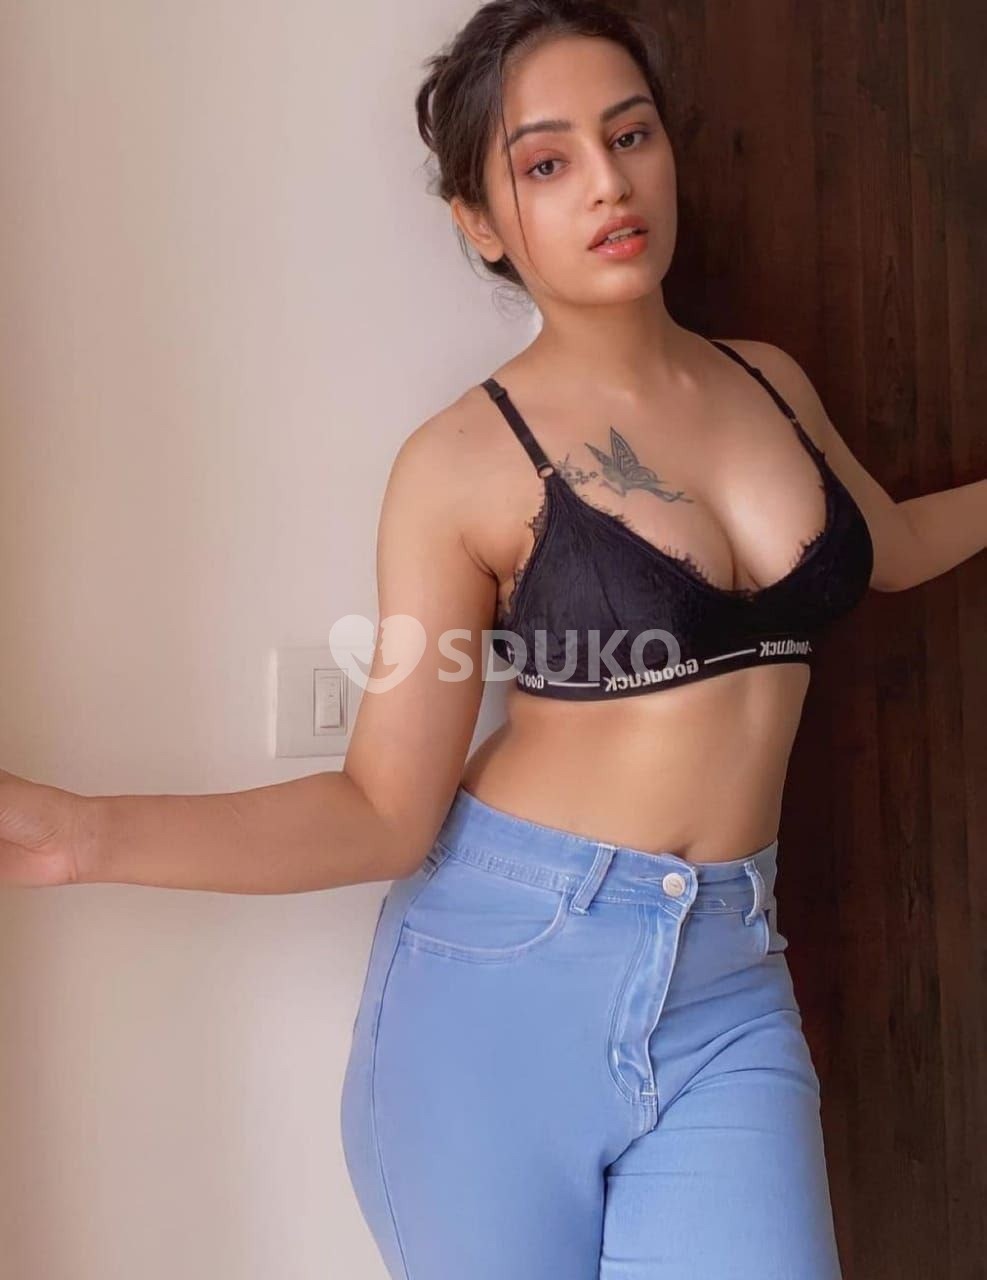 Bhilwara ⭐⭐⭐⭐⭐ AFFORDABLE INDEPENDENT BEST HIGH CLASS COLLEGE GIRL AND HOUSEWIFE AVAILABLE 24 HOURS,,,..